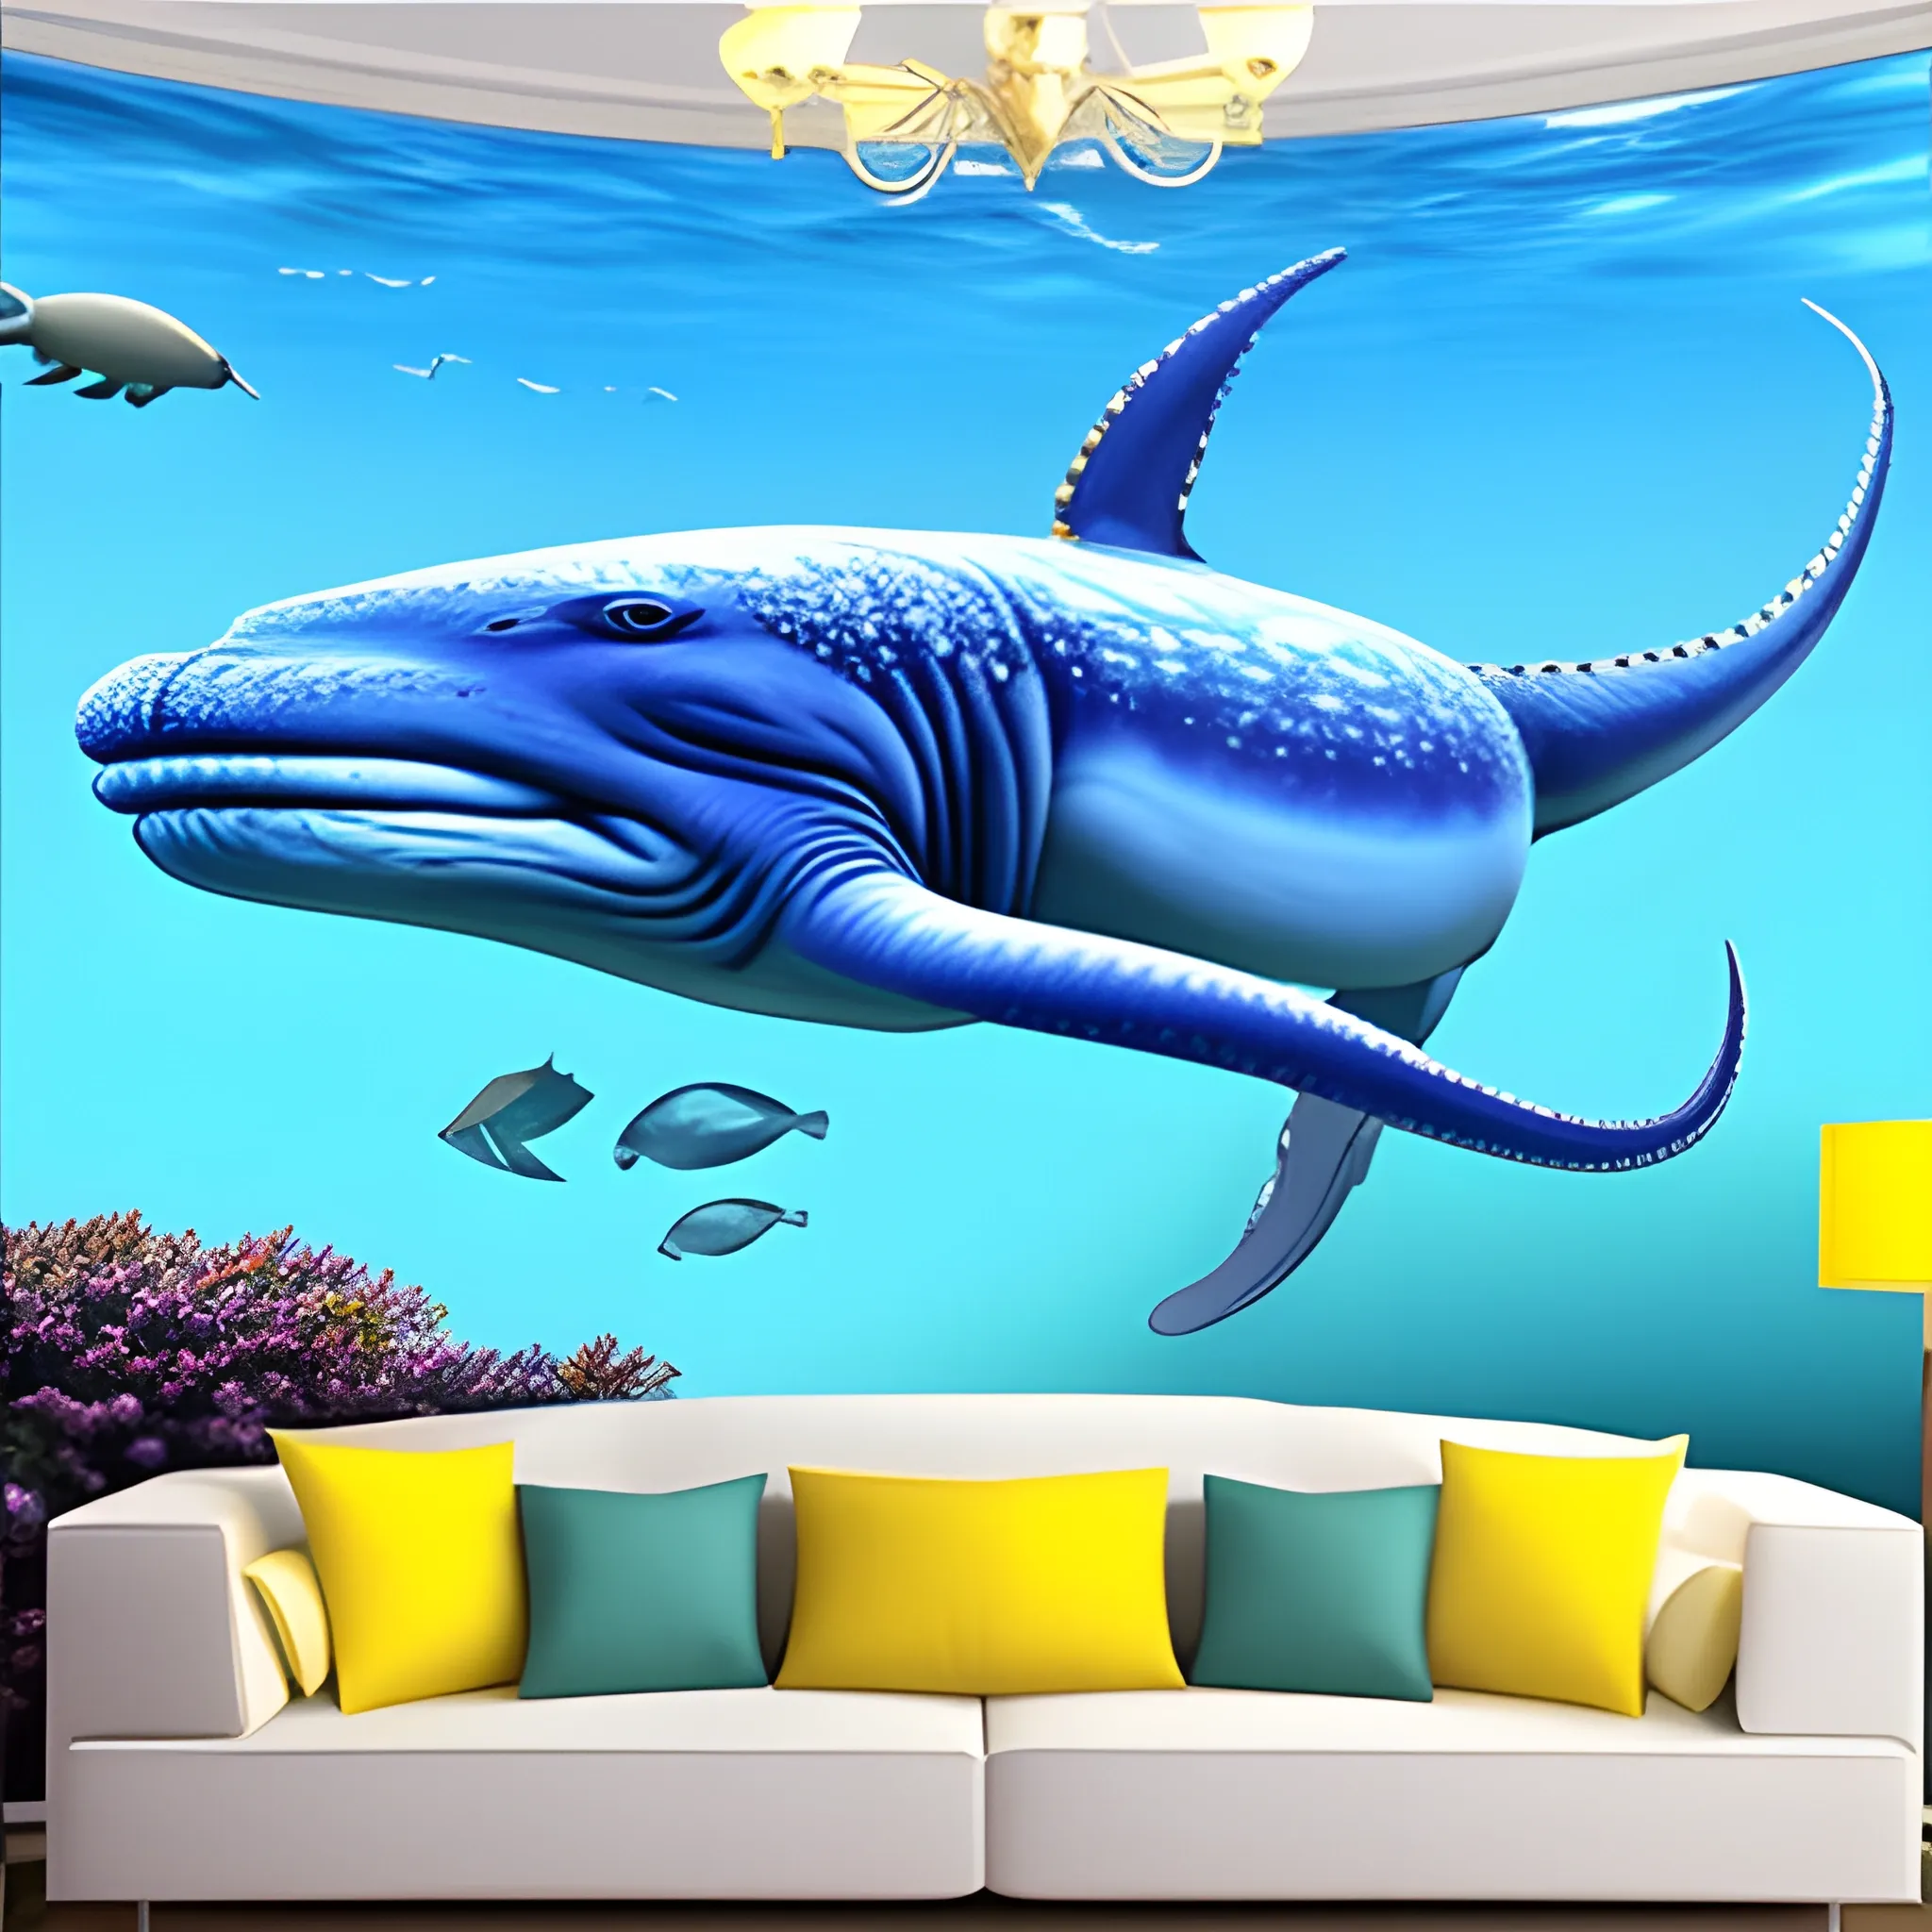 blue whale with baby whale under sea contain crab, octopus, seahorse, jellyfish, small angel fish, 3D